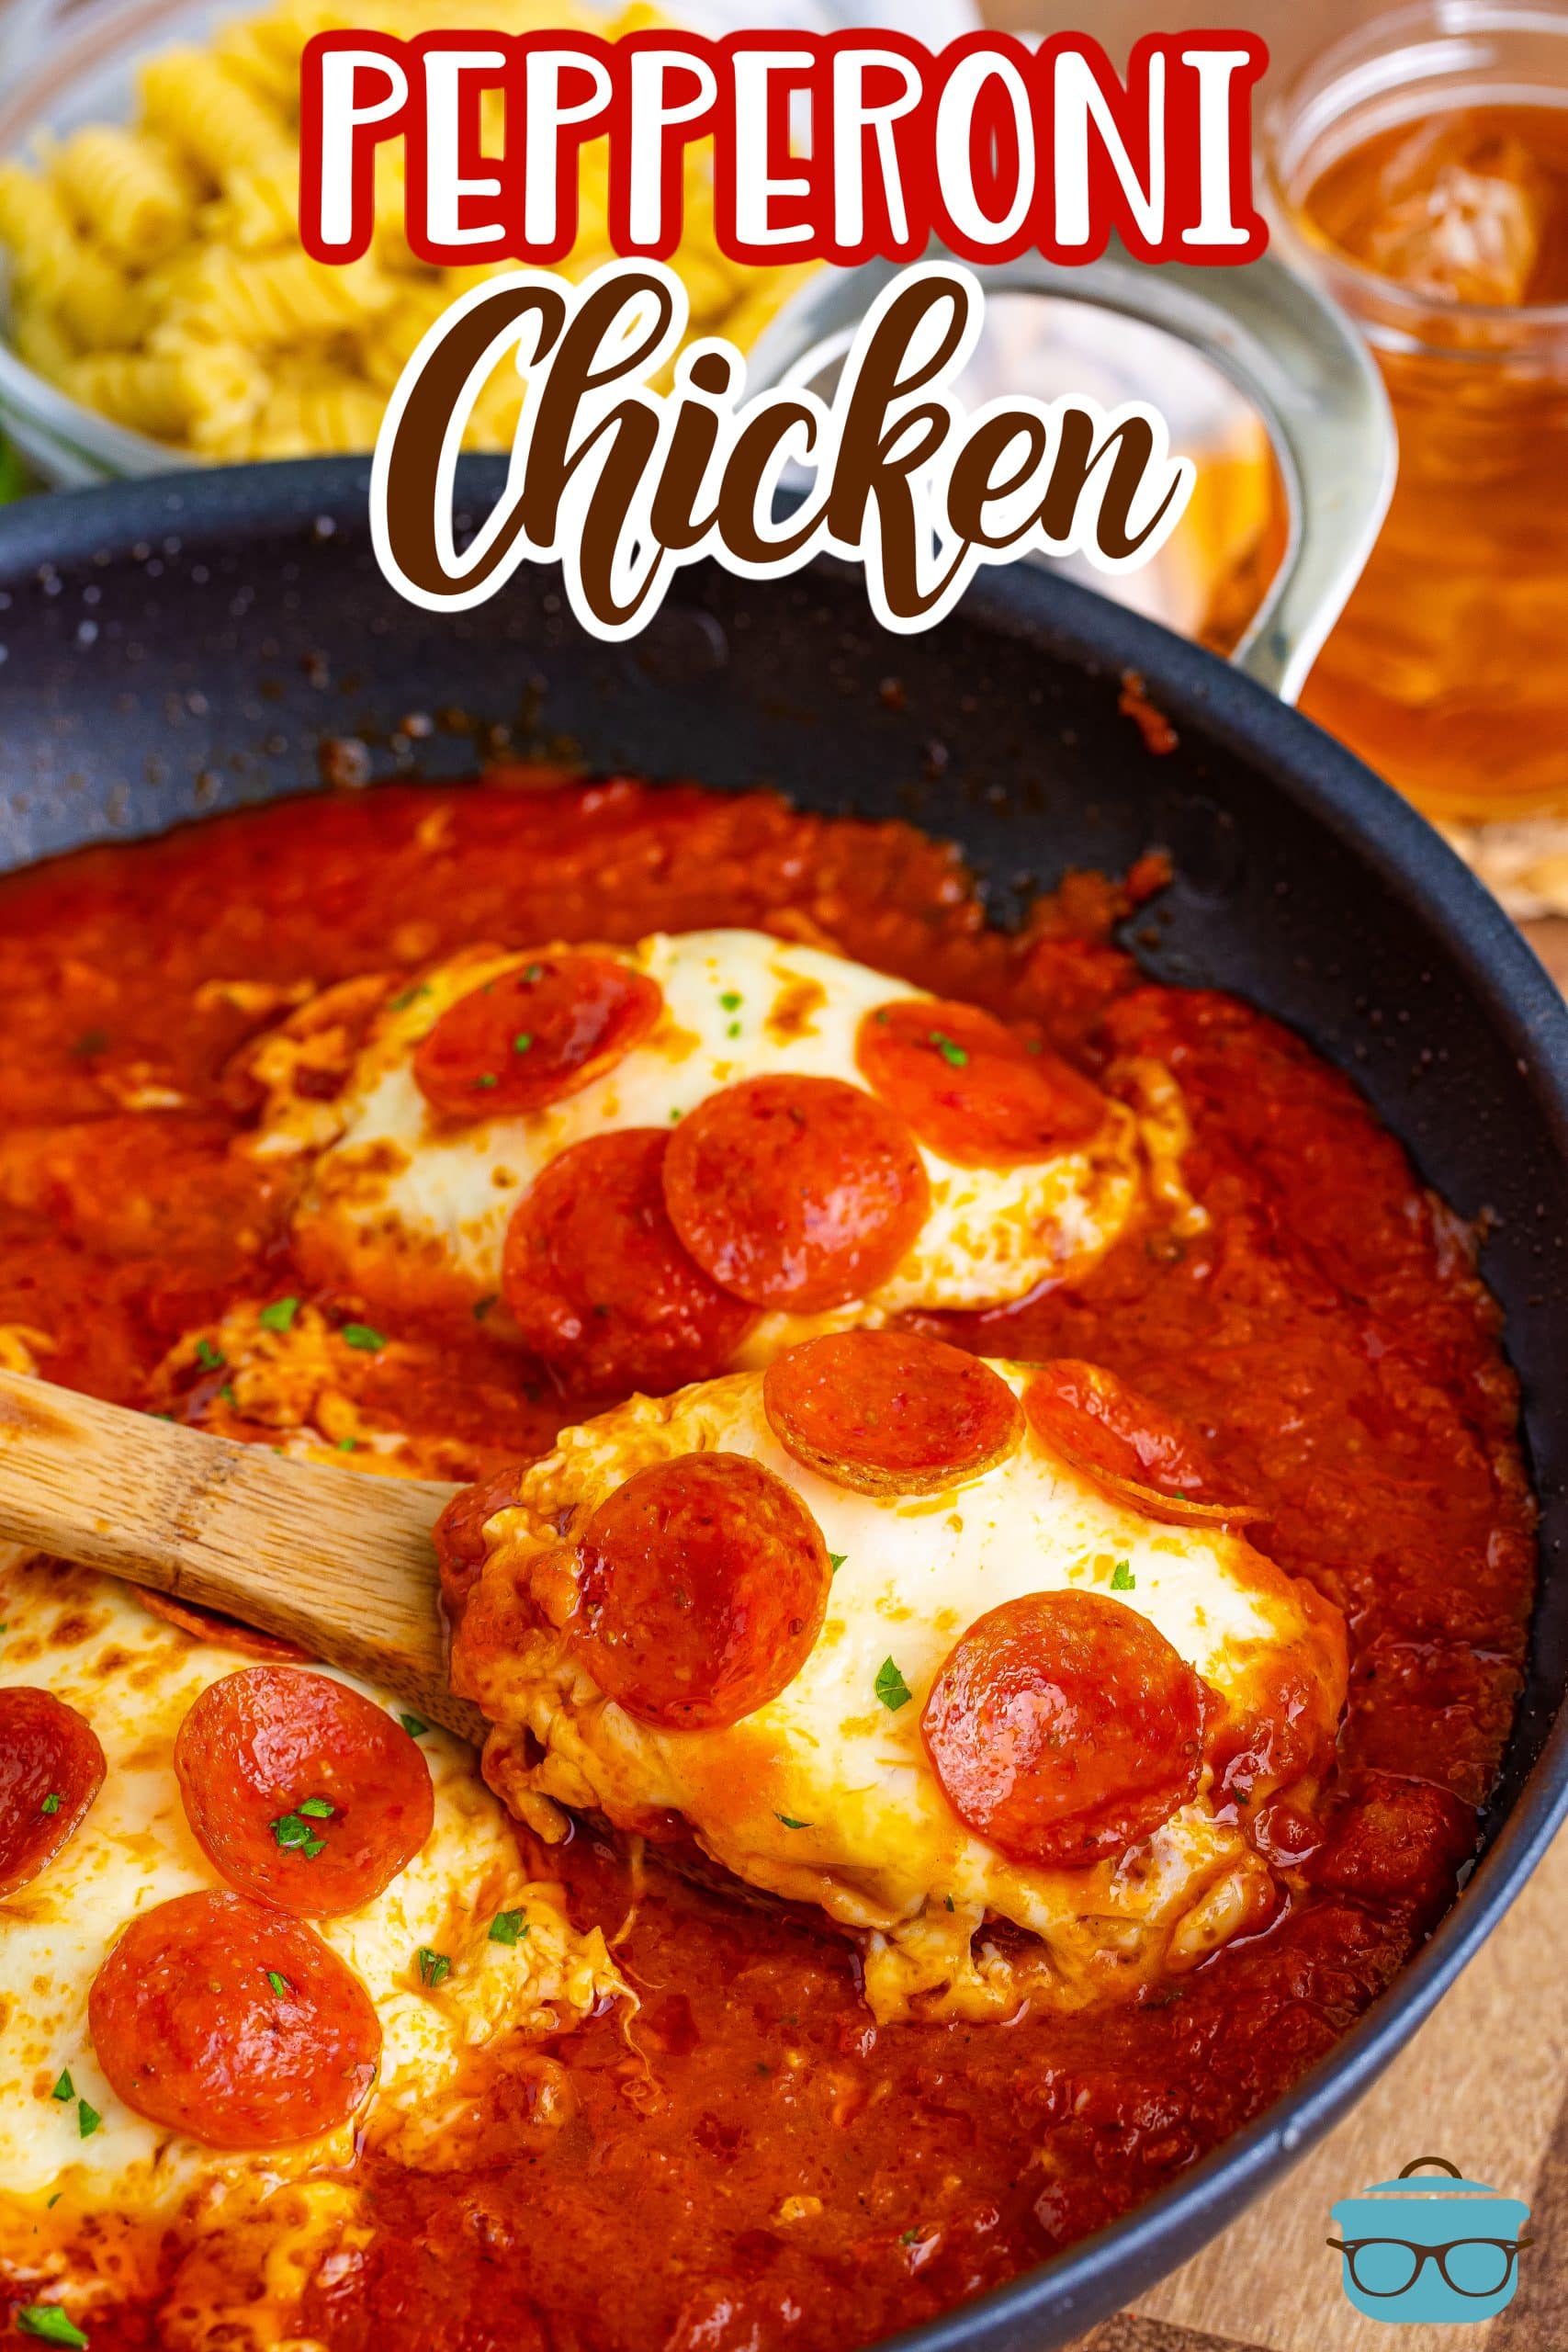 A skillet of Pepperoni Chicken with a wooden spoon.